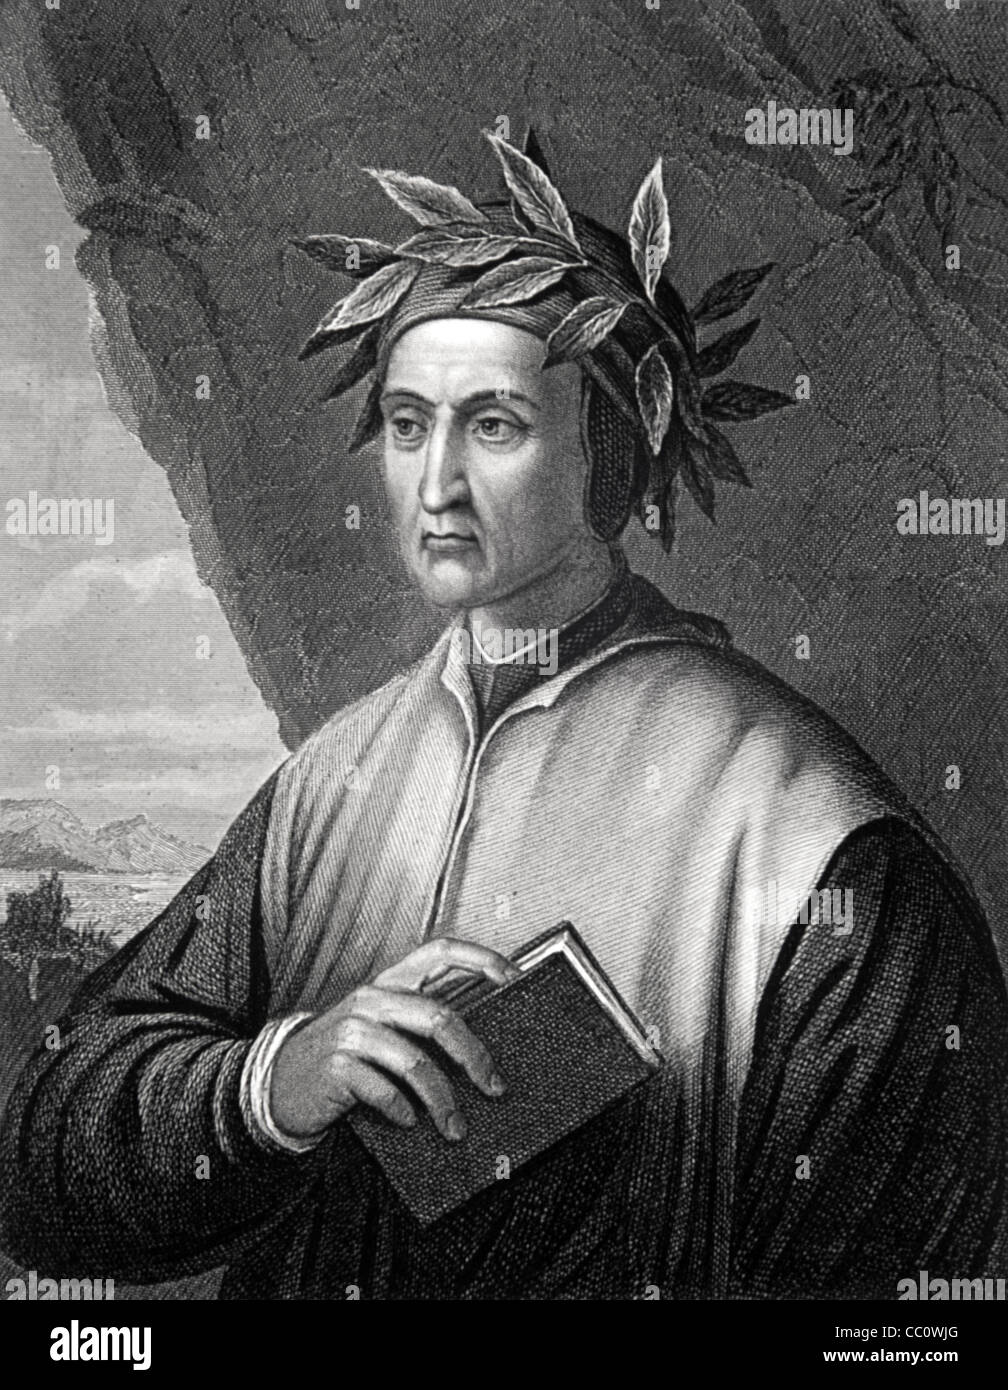 Dante Alighieri (1265-1321) Italian Poet, Writer & Political Thinker c19th Portrait Engr by Wagstaff Painting by Tofanelli. Vintage Illustration or Engraving Stock Photo